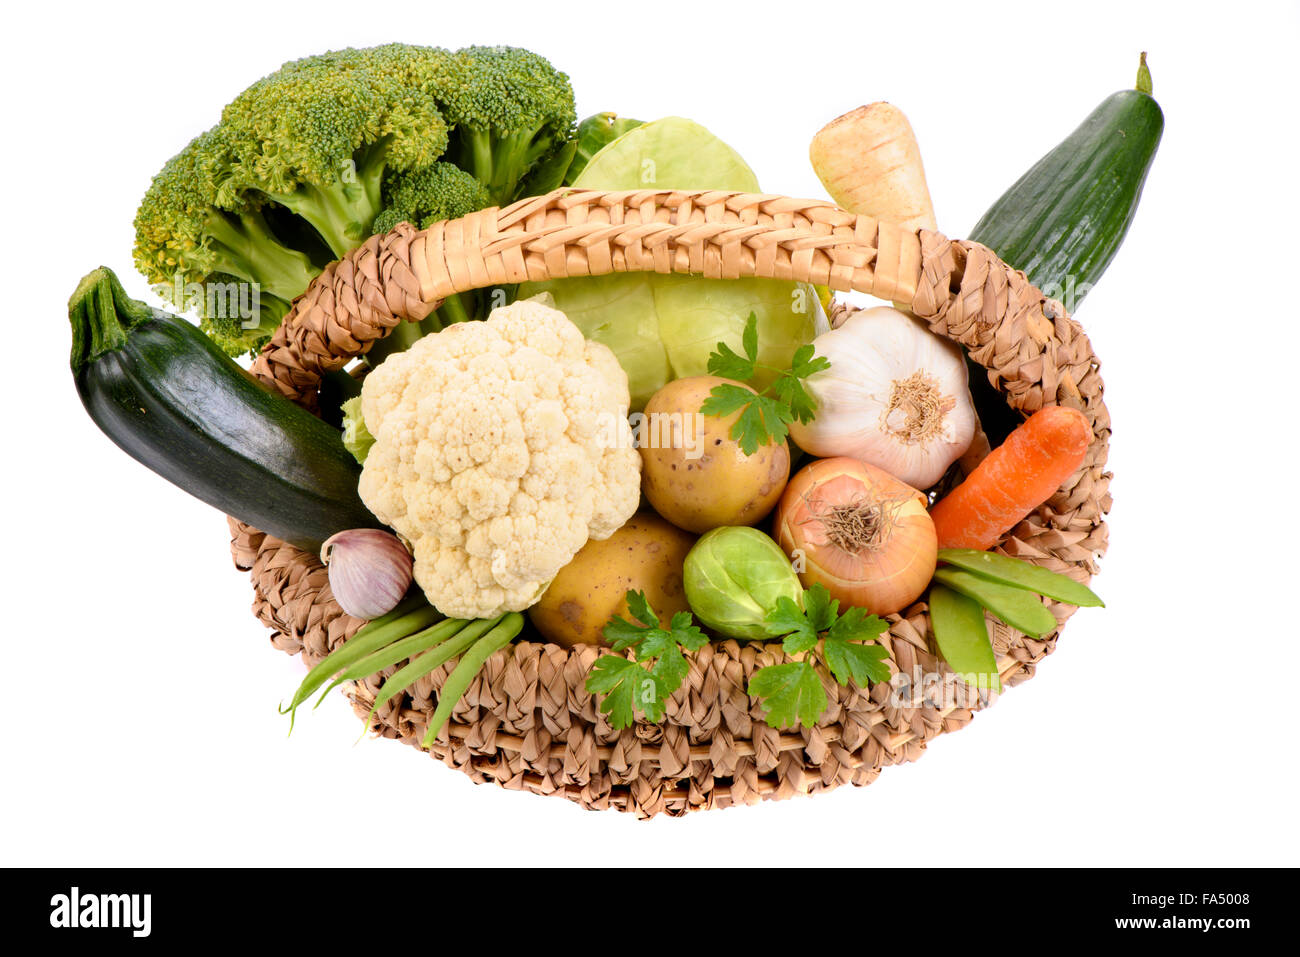 fresh vegetables and fruits Stock Photo